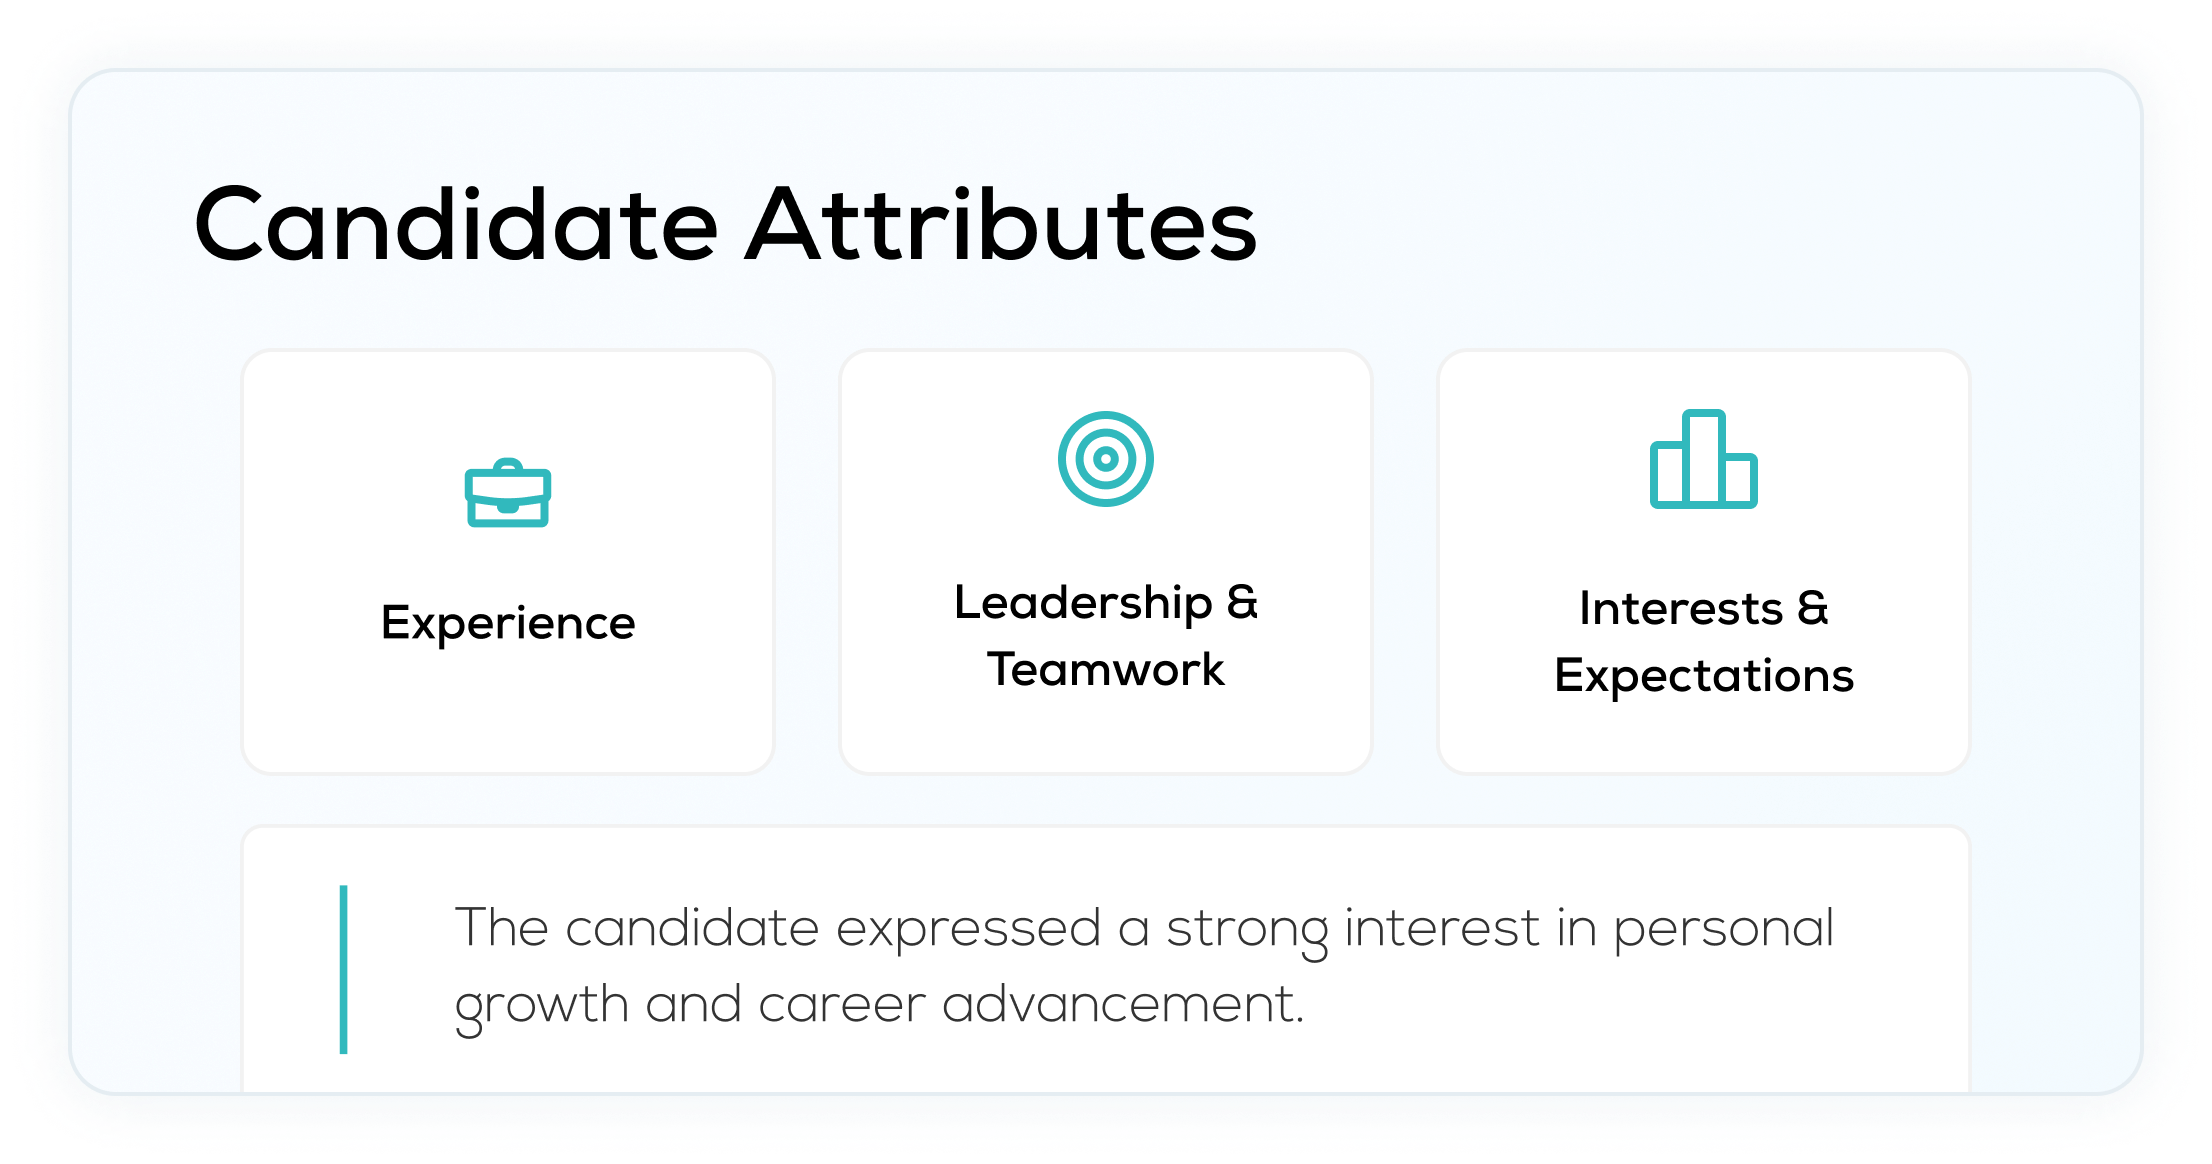 Candidate Attributes